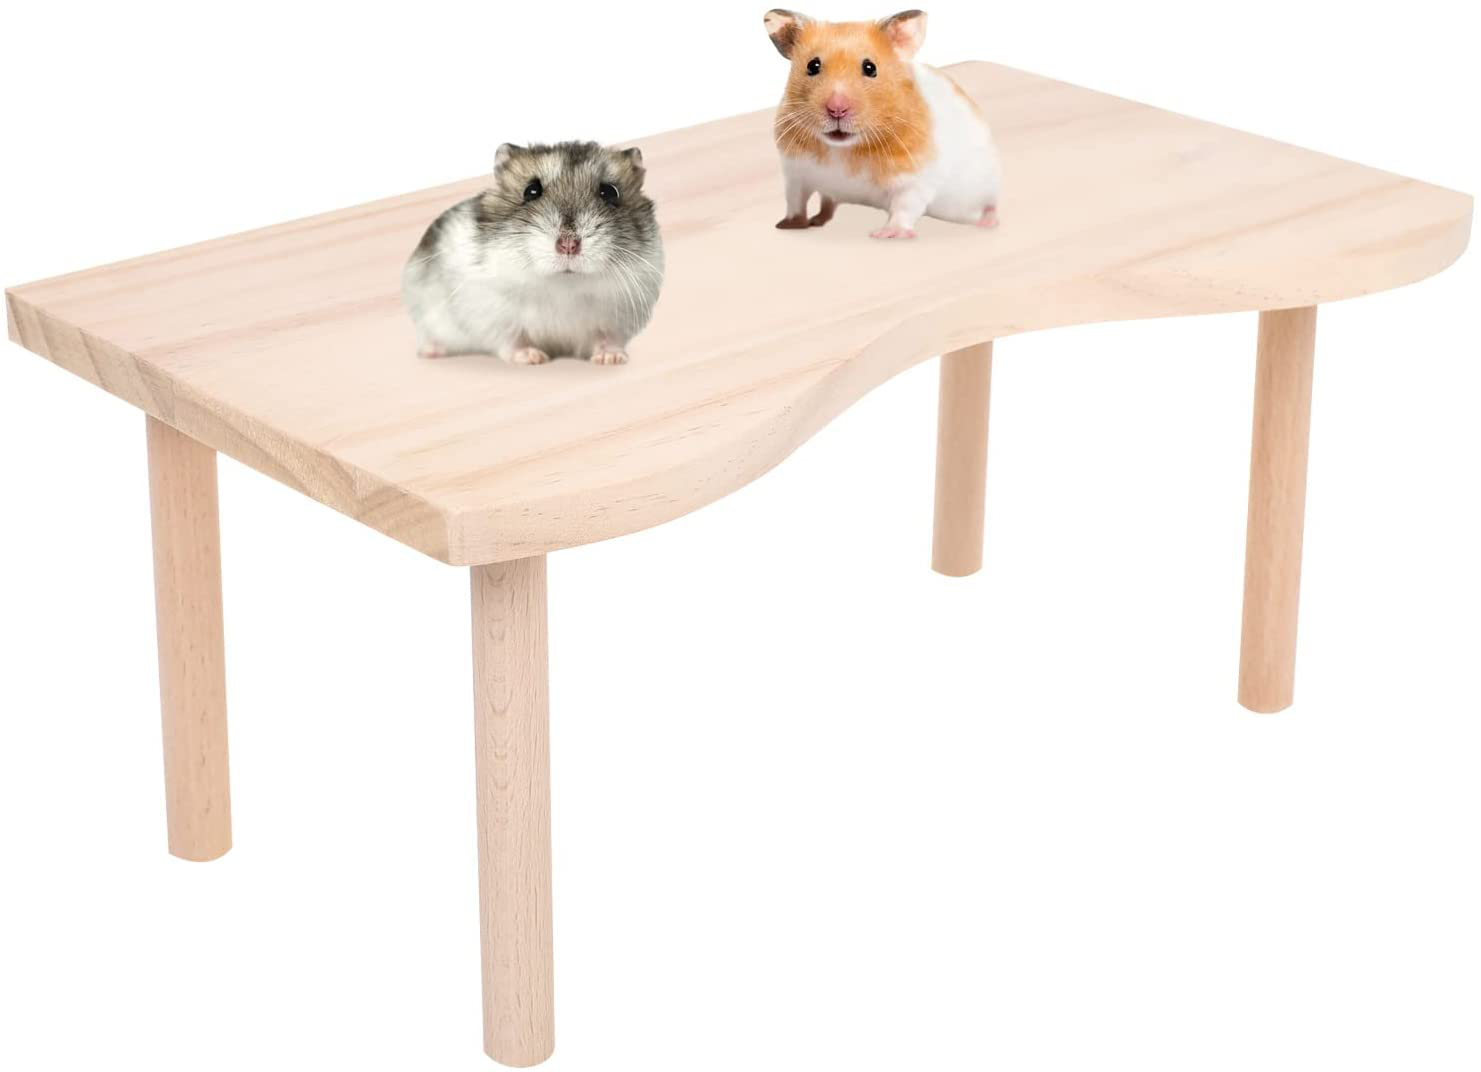 Hamster Play Wooden Platform, Natural Wood Desk for Small Animal Cage, Pet Bowl Drinking Bottle Stand